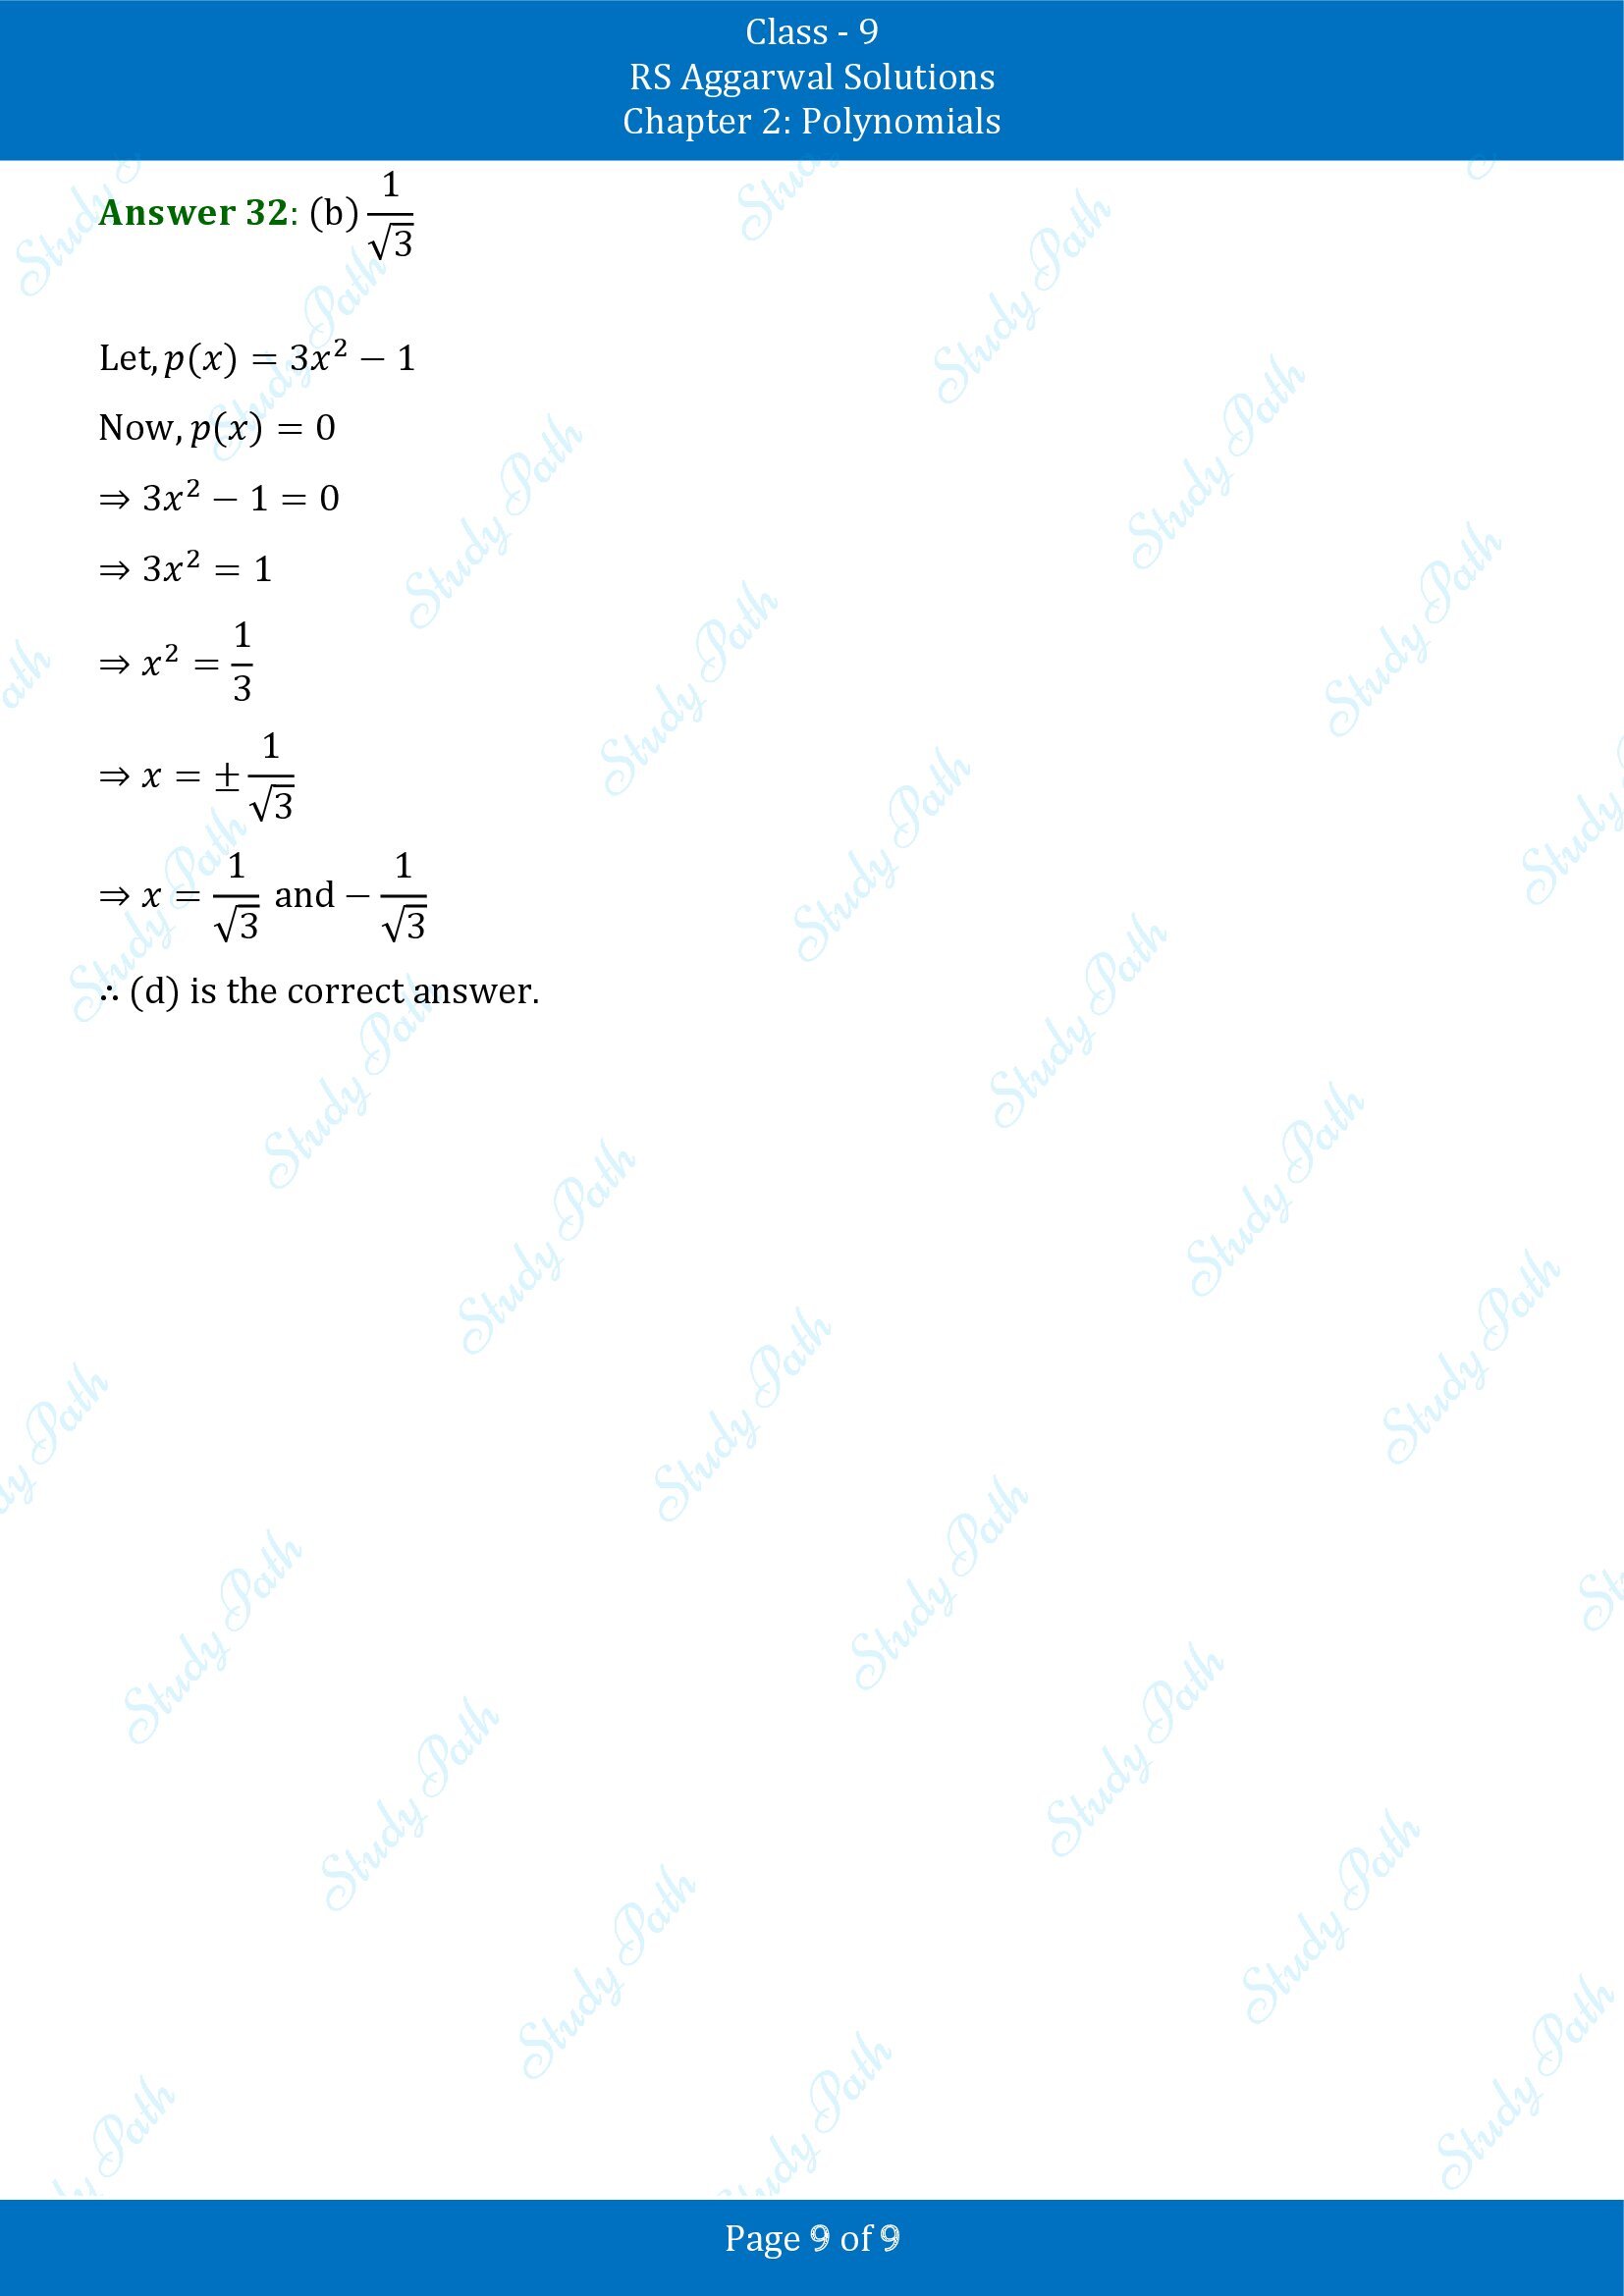 RS Aggarwal Solutions Class 9 Chapter 2 Polynomials Multiple Choice Questions MCQs 00009